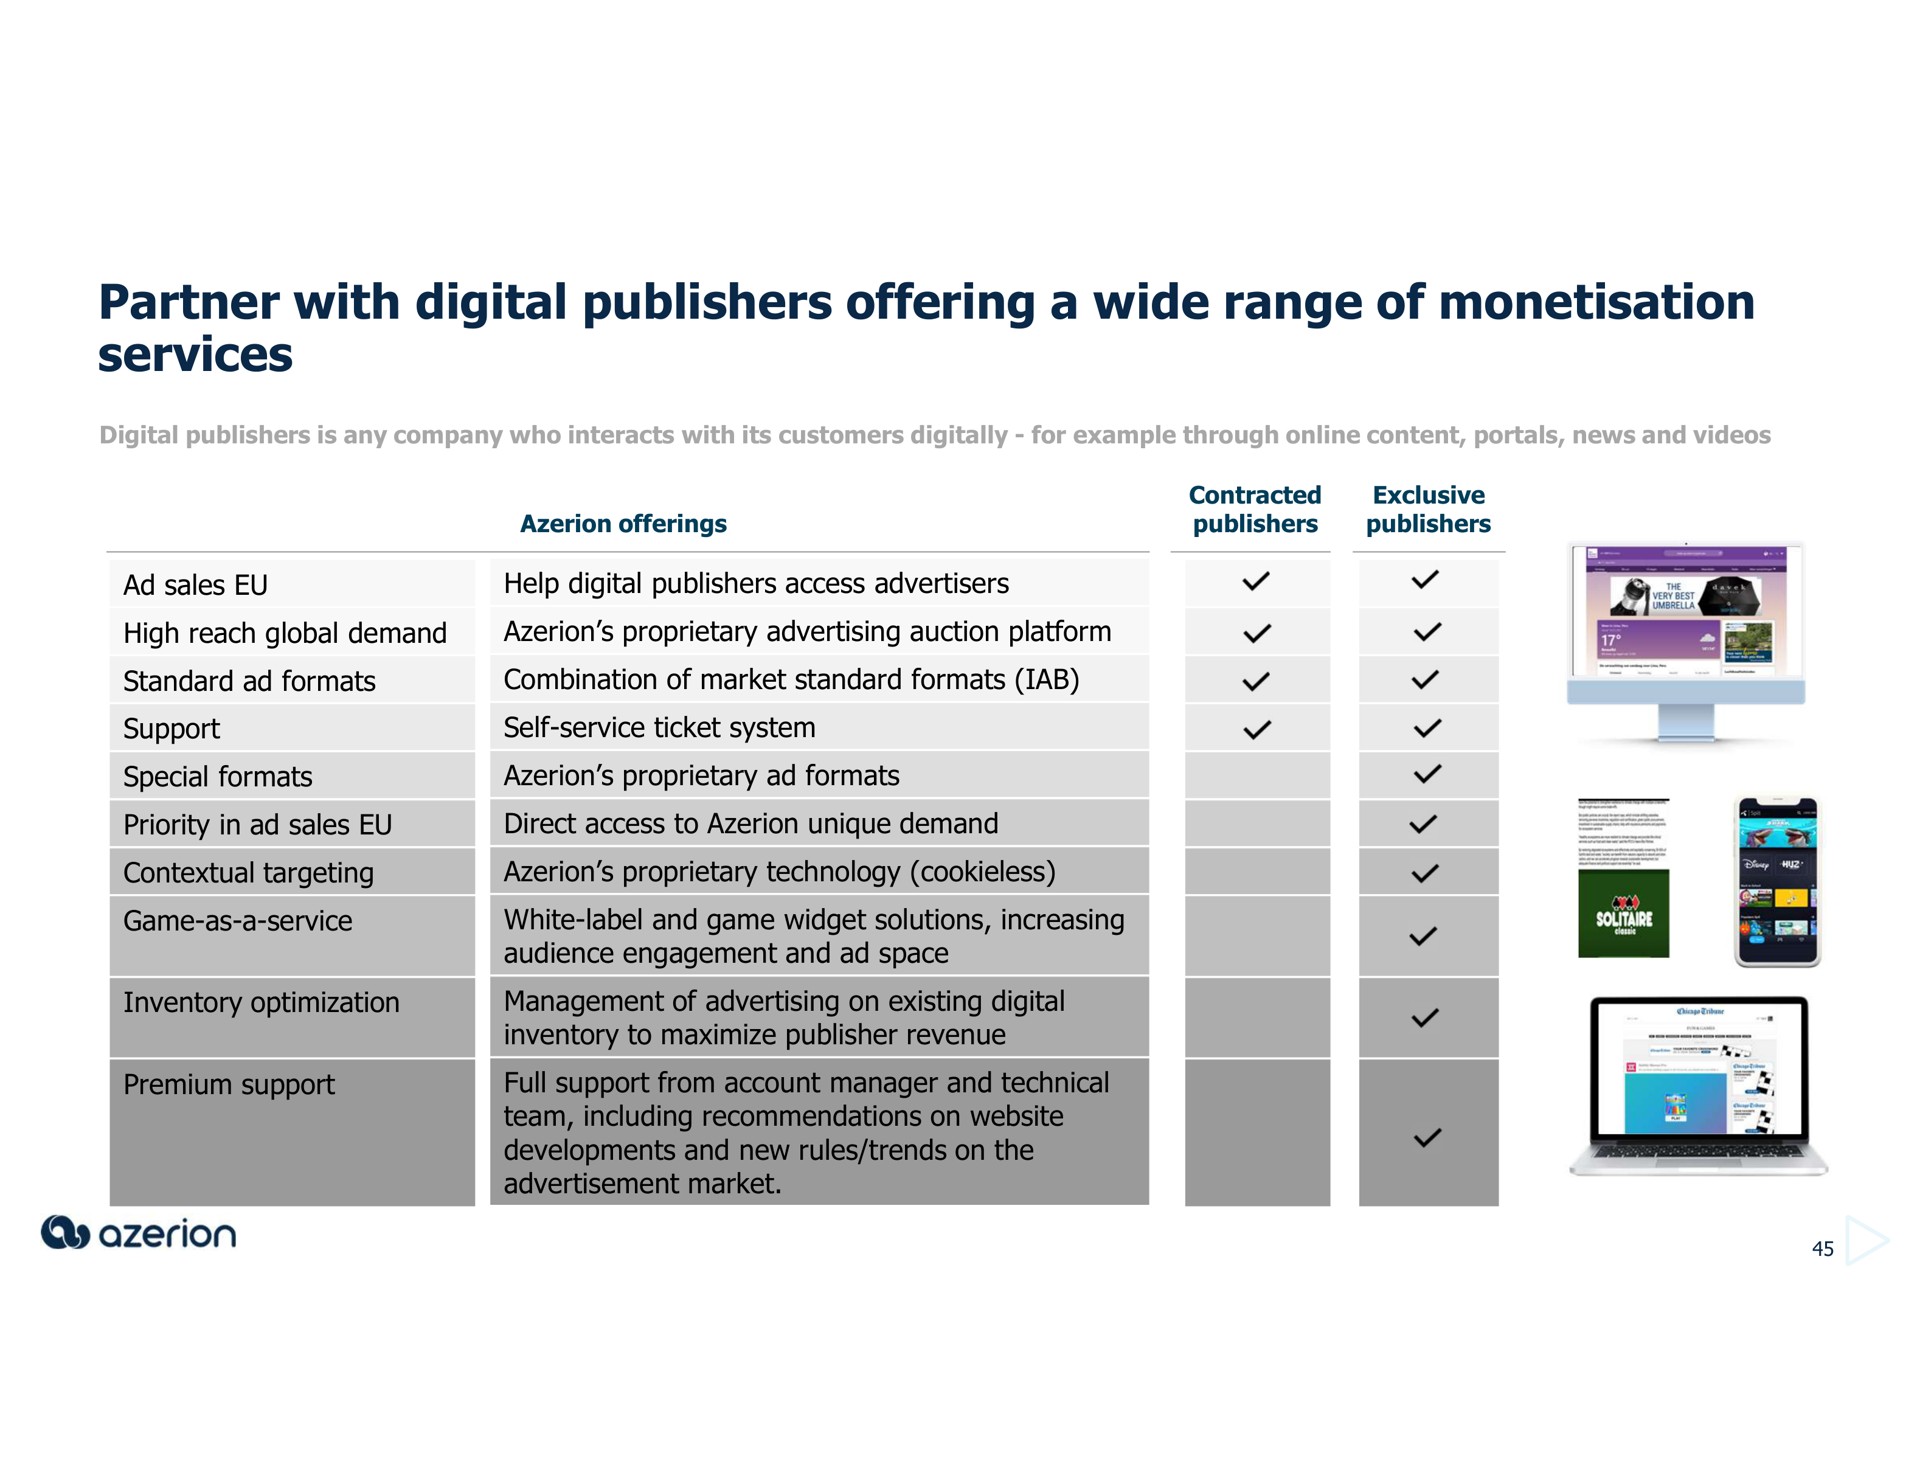 partner with digital publishers offering a wide range of services | Azerion